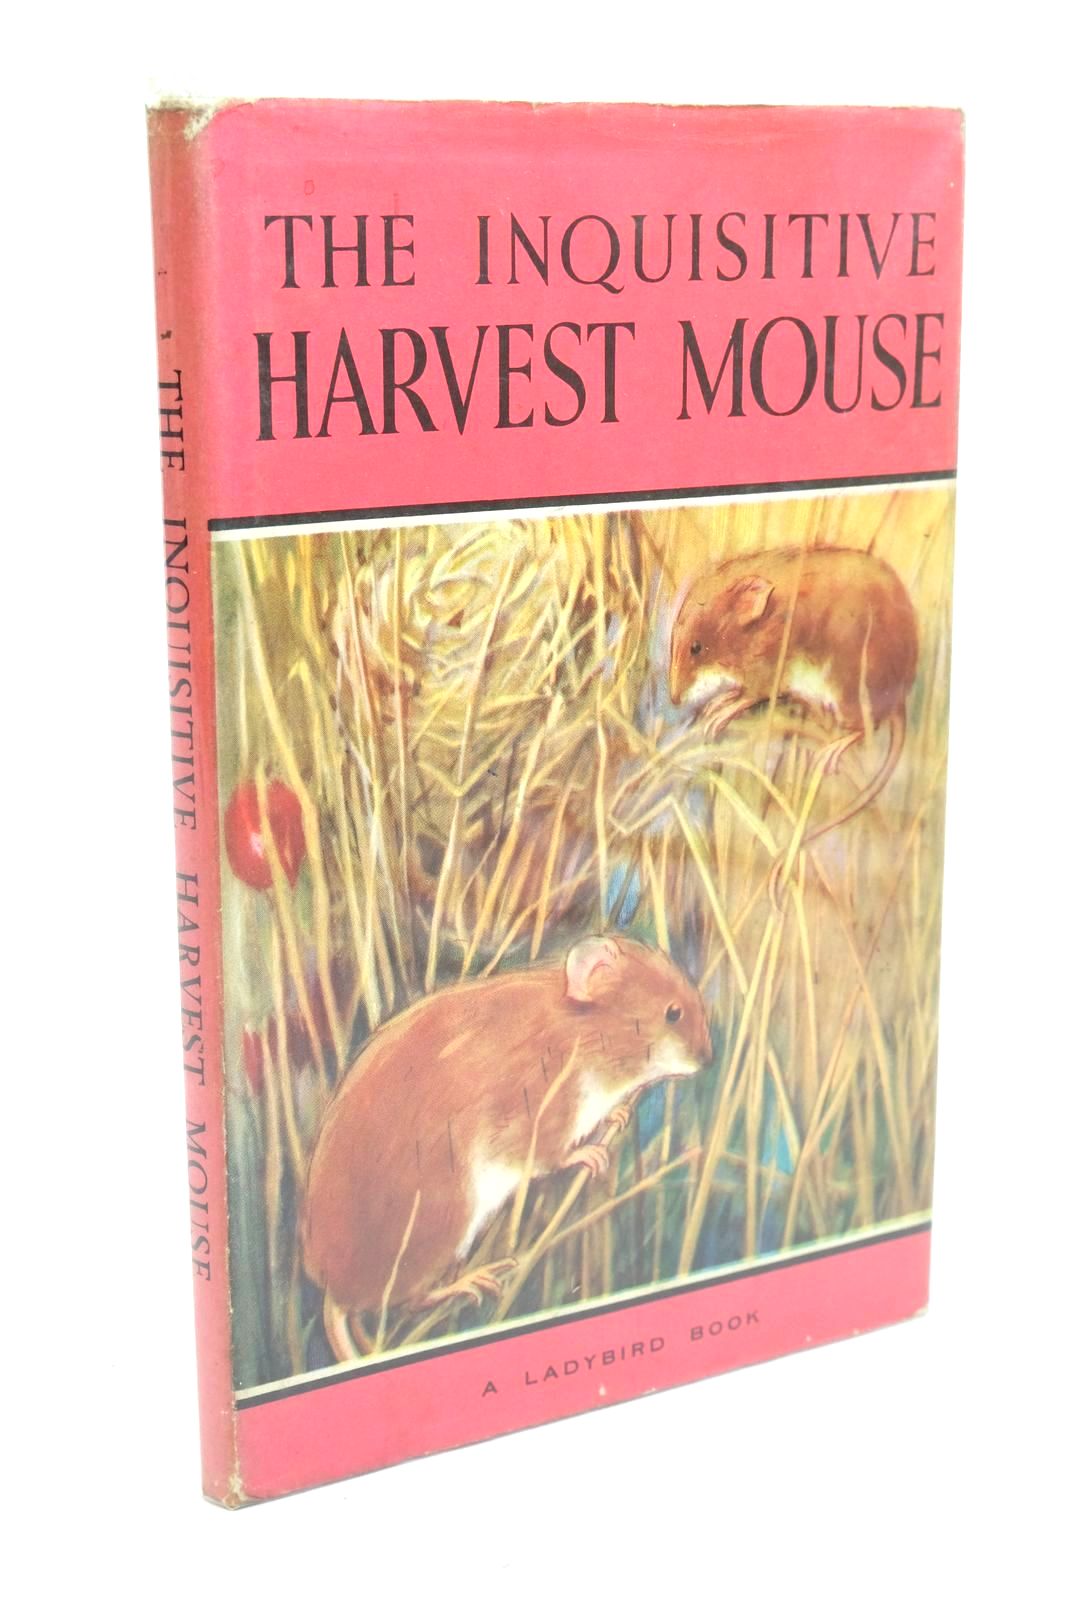 Photo of THE INQUISITIVE HARVEST MOUSE written by Barr, Noel illustrated by Hickling, P.B. published by Wills & Hepworth Ltd. (STOCK CODE: 1322396)  for sale by Stella & Rose's Books